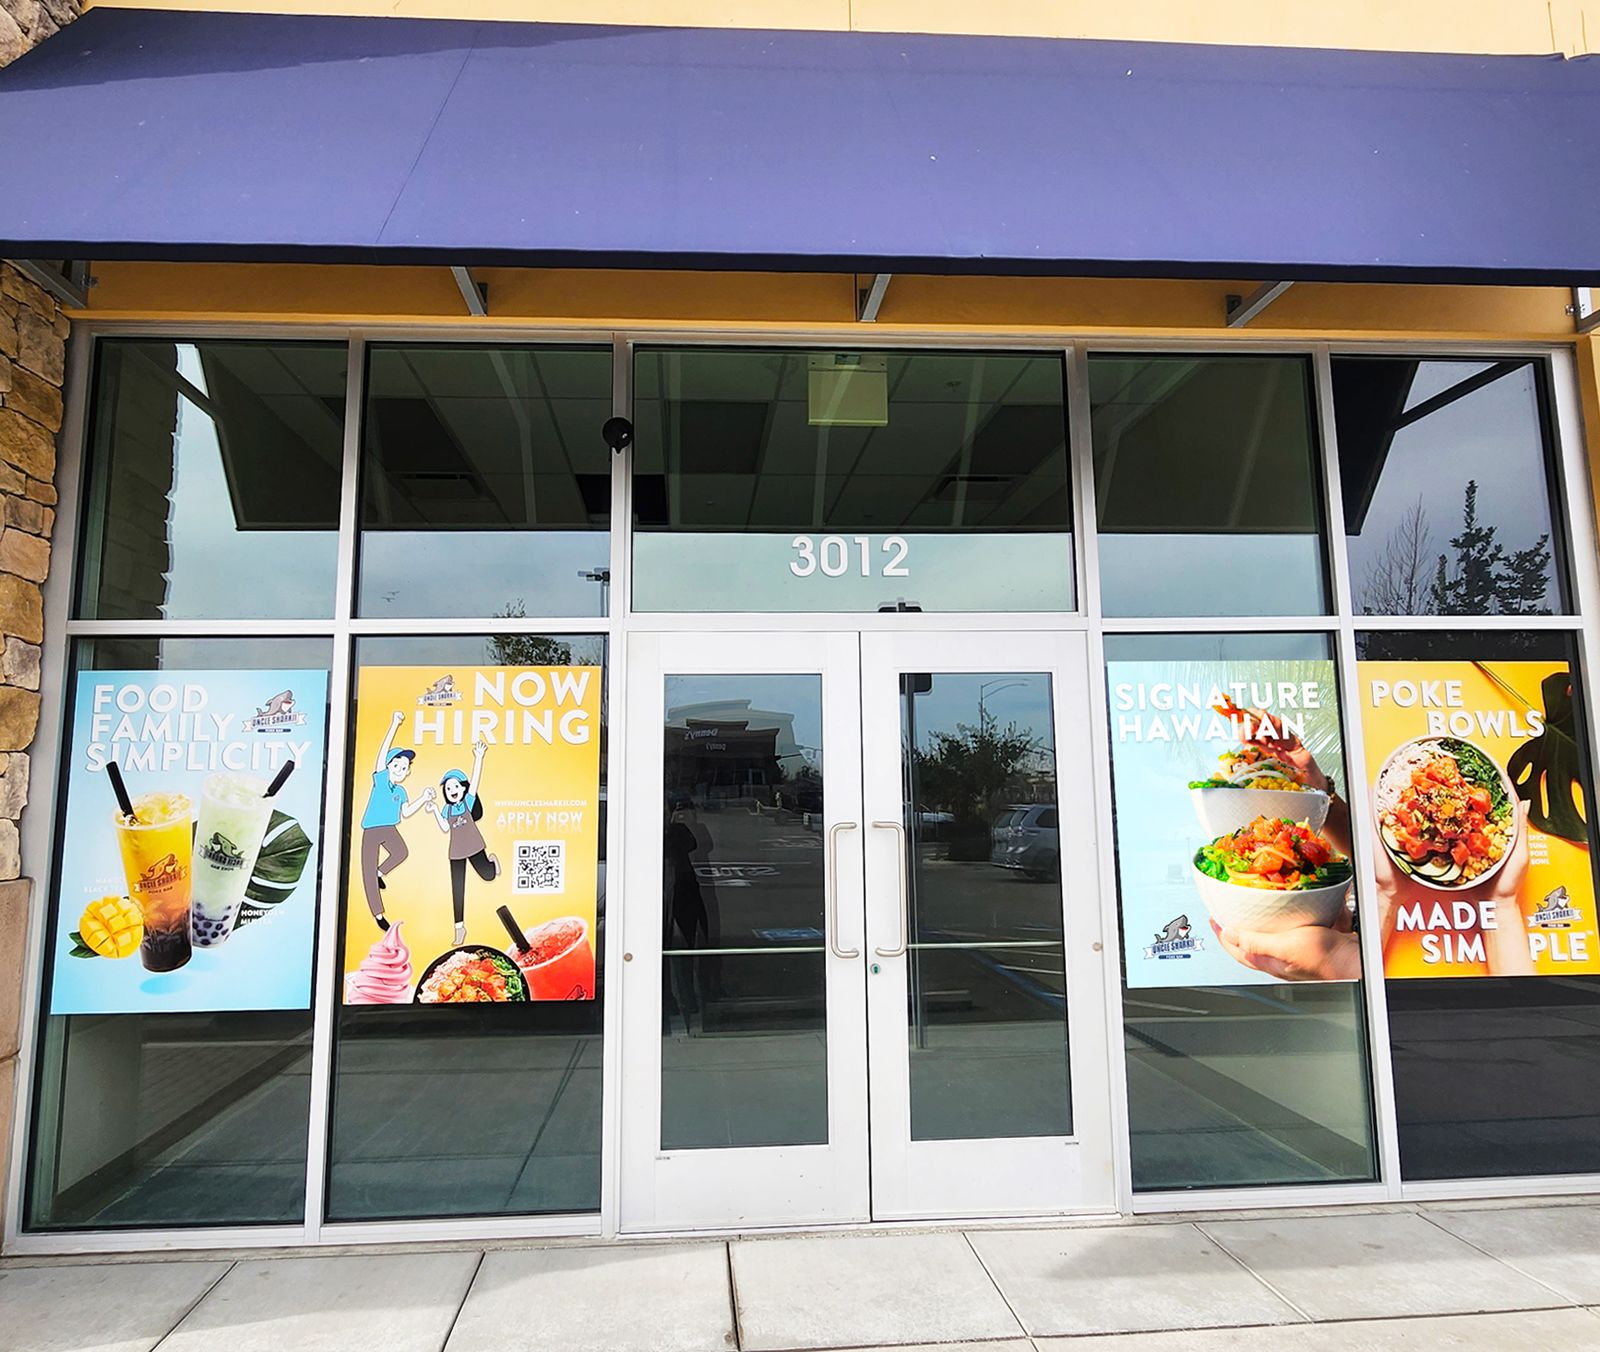 Uncle Sharkii Poke Bar, a Hawaiian Fast-Food Poke Franchise, Announces a New Location will be Opening in Livermore, CA